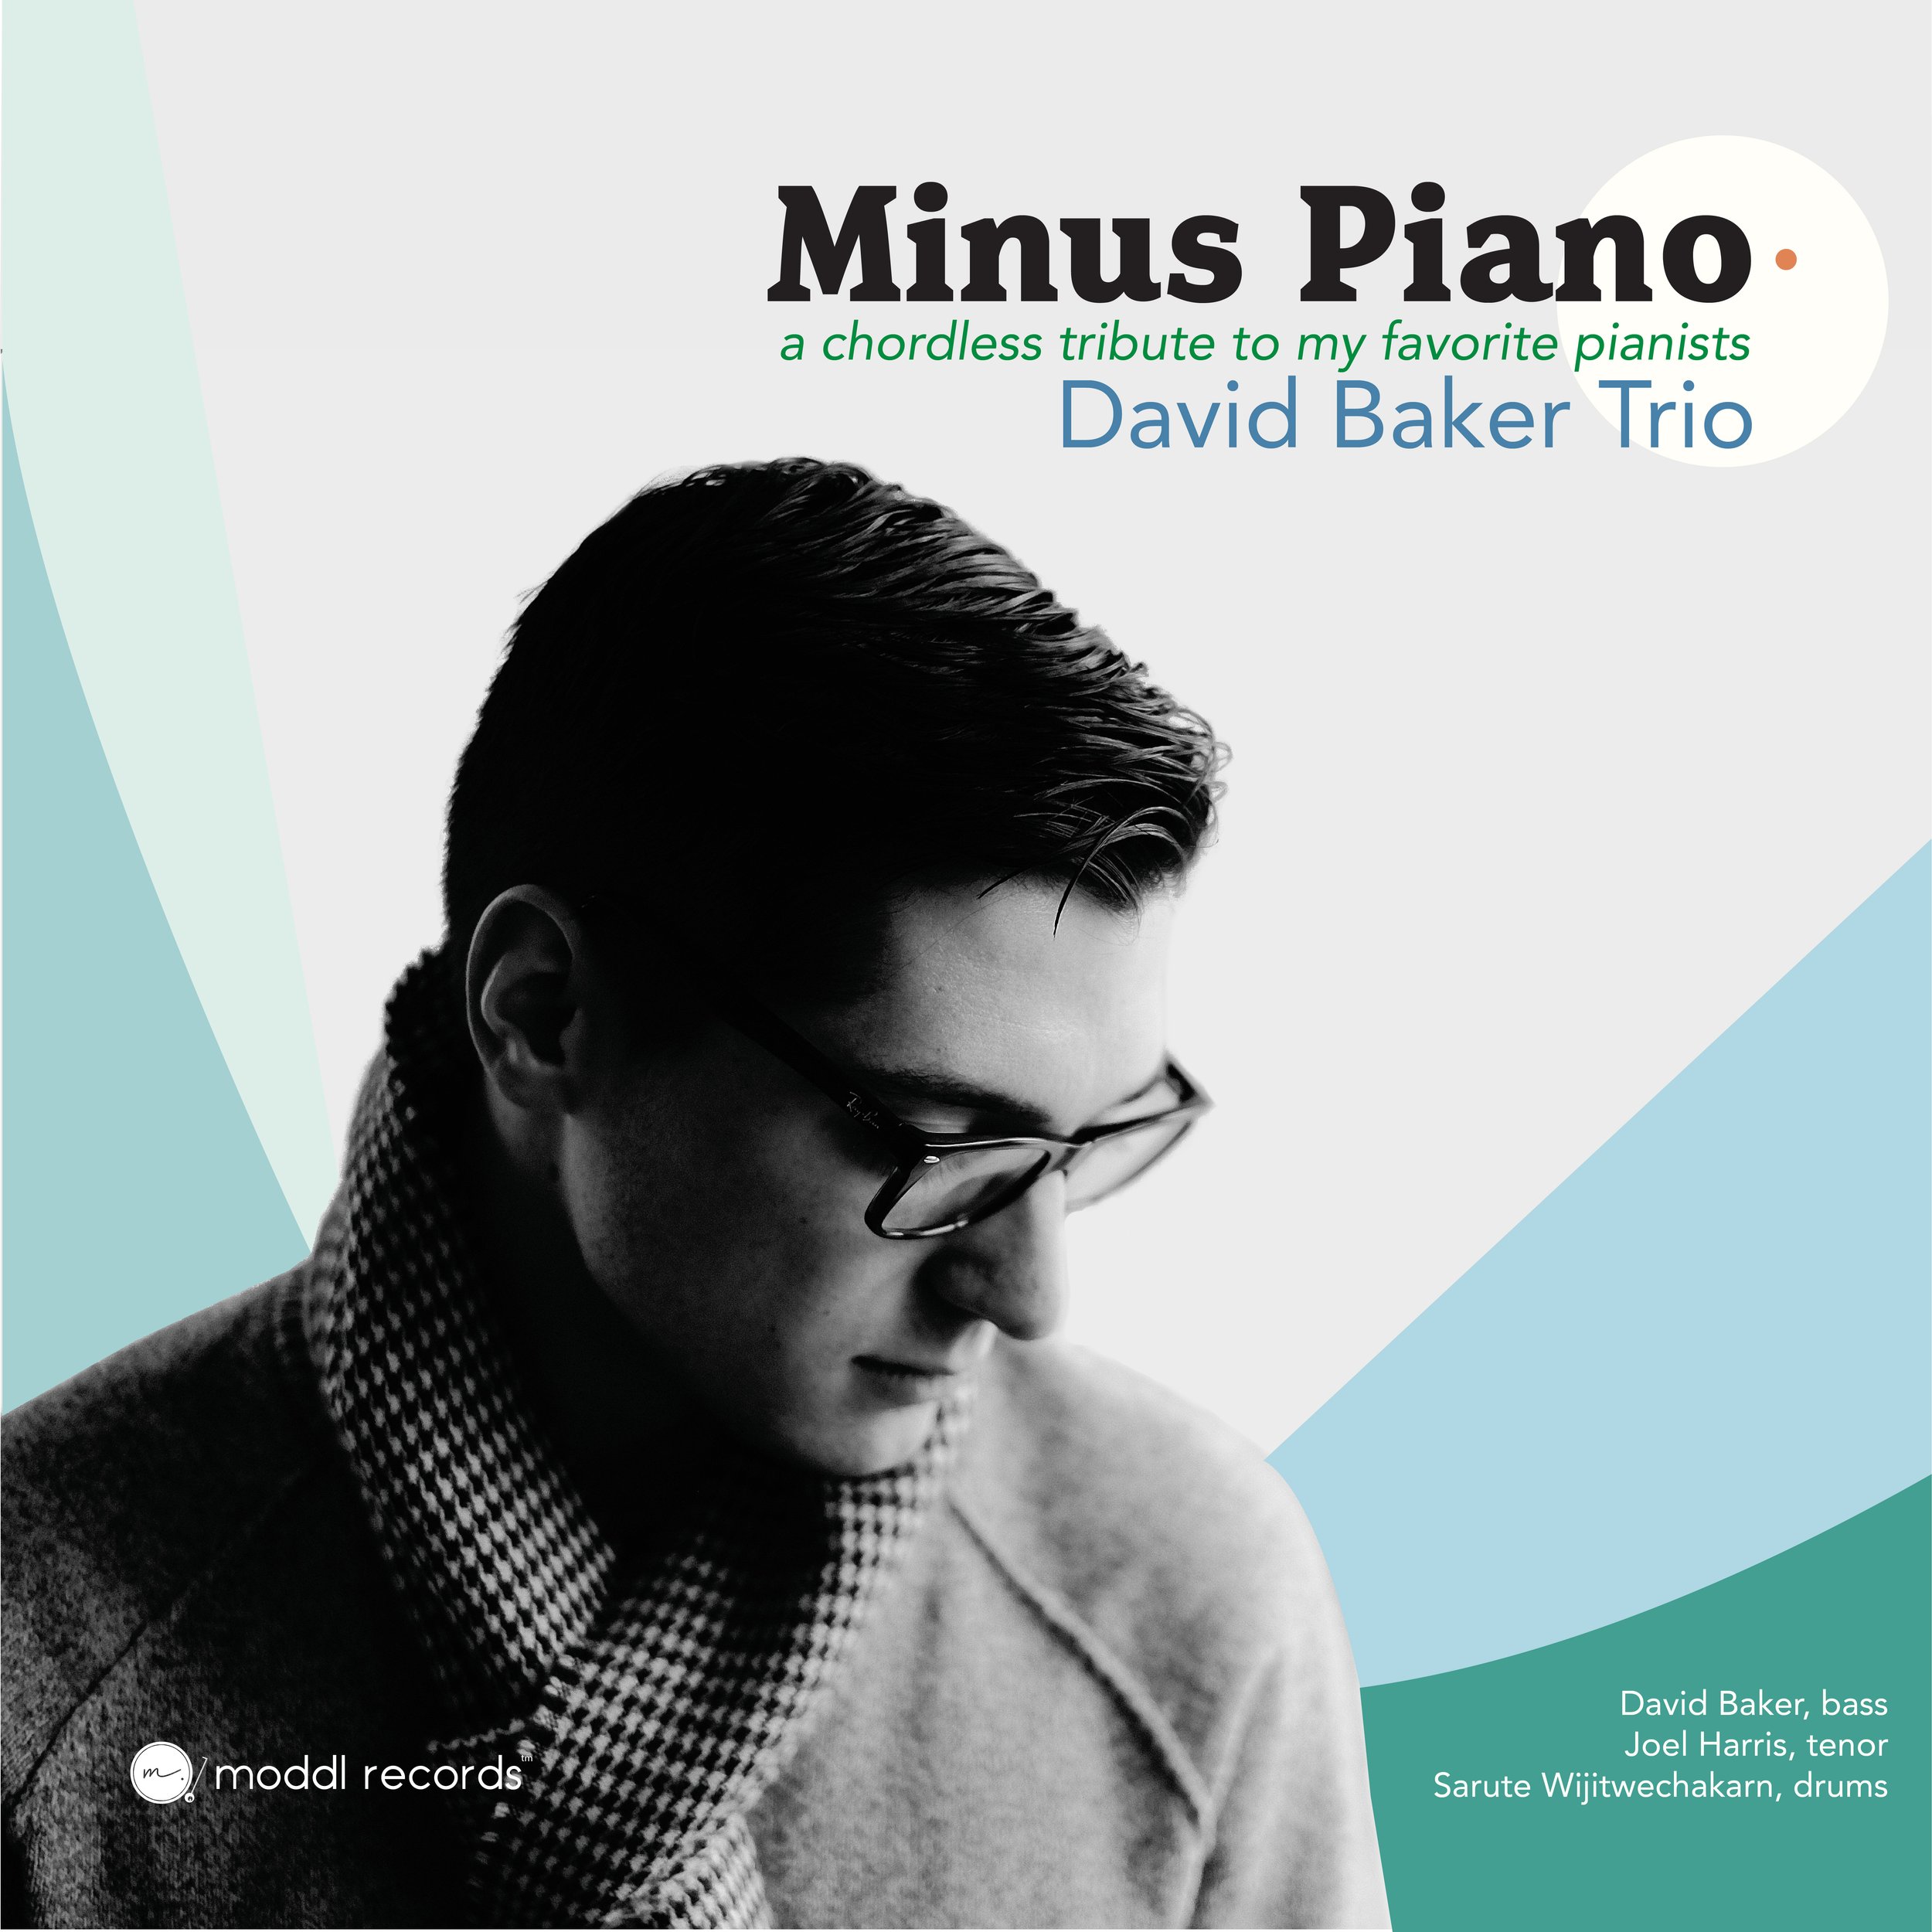 Minus Piano Cover(lower res).jpg